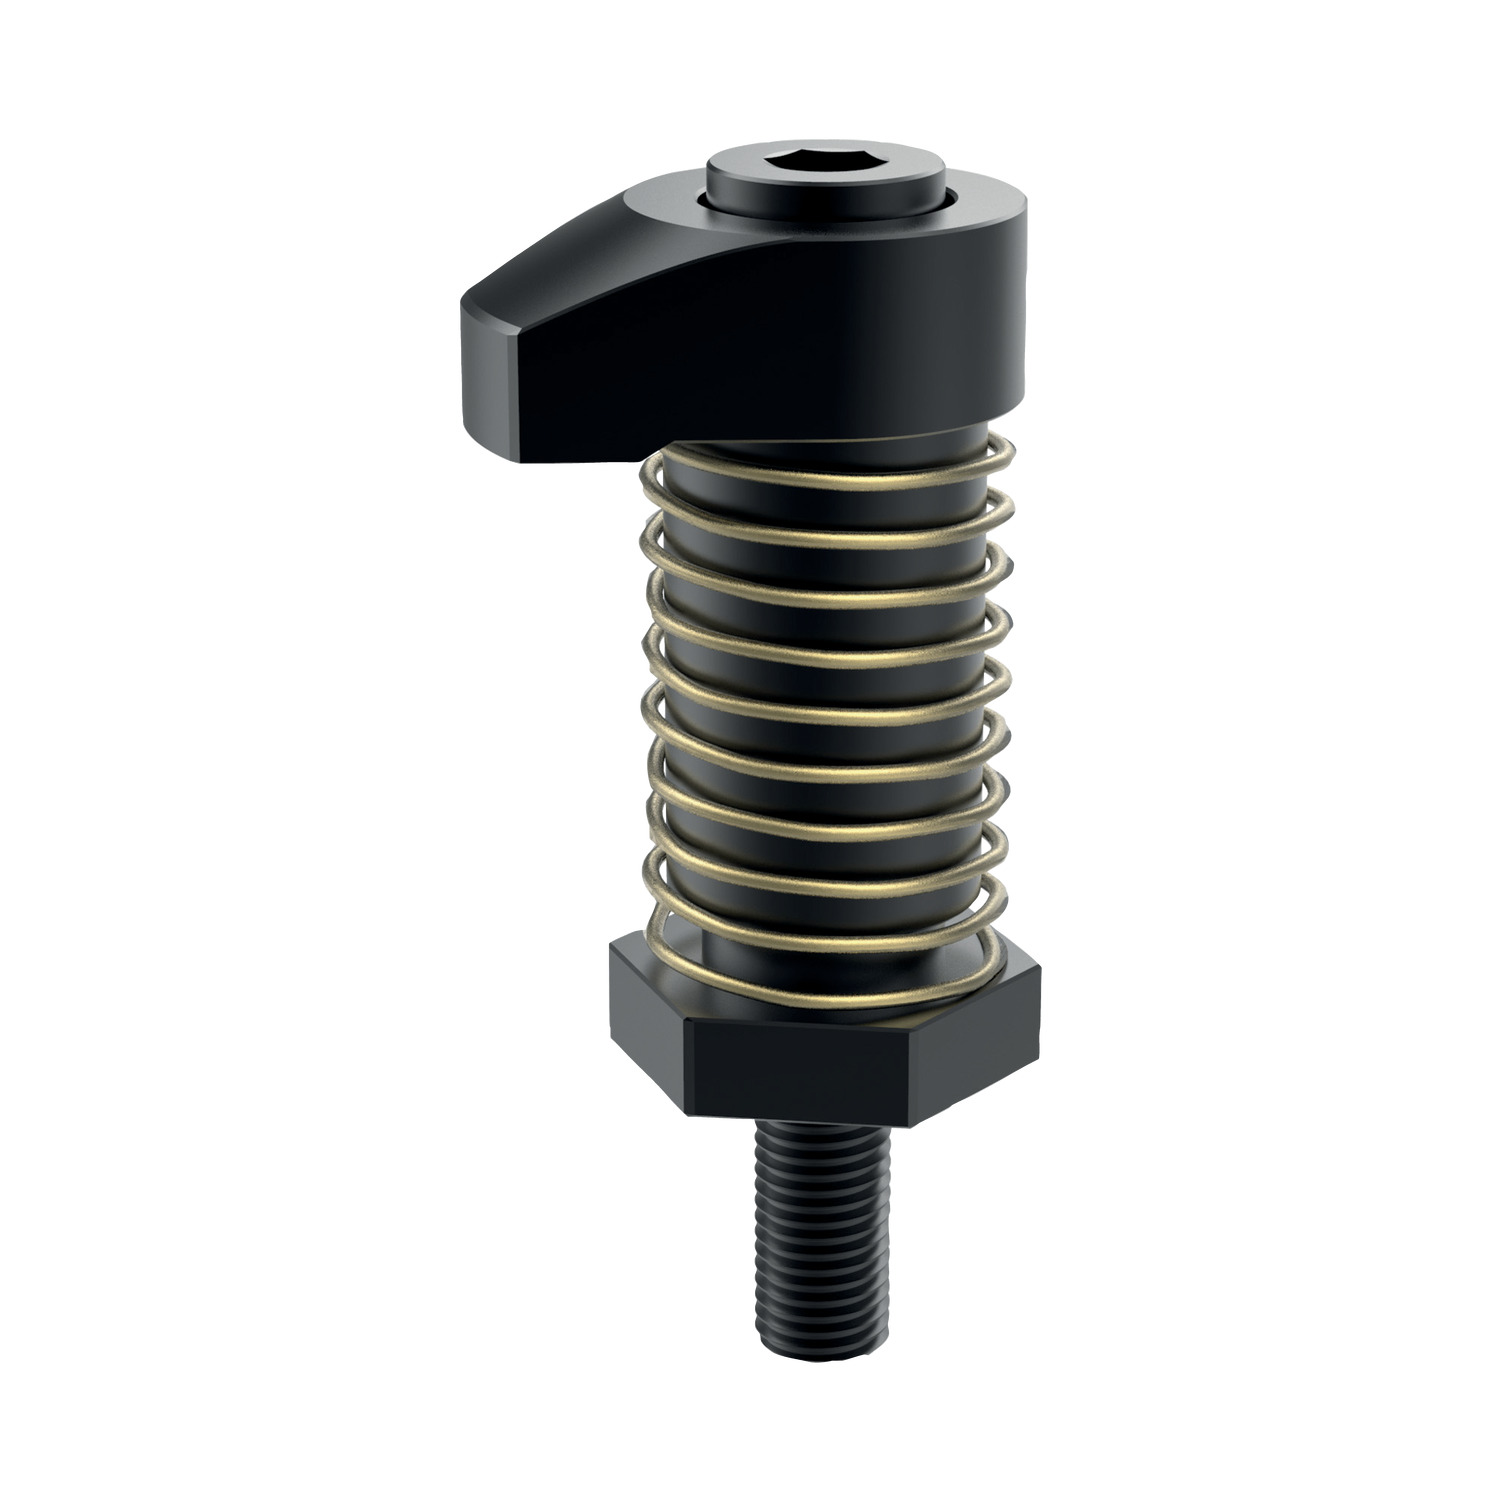 Product 12552, Hook Clamps spring loaded / 